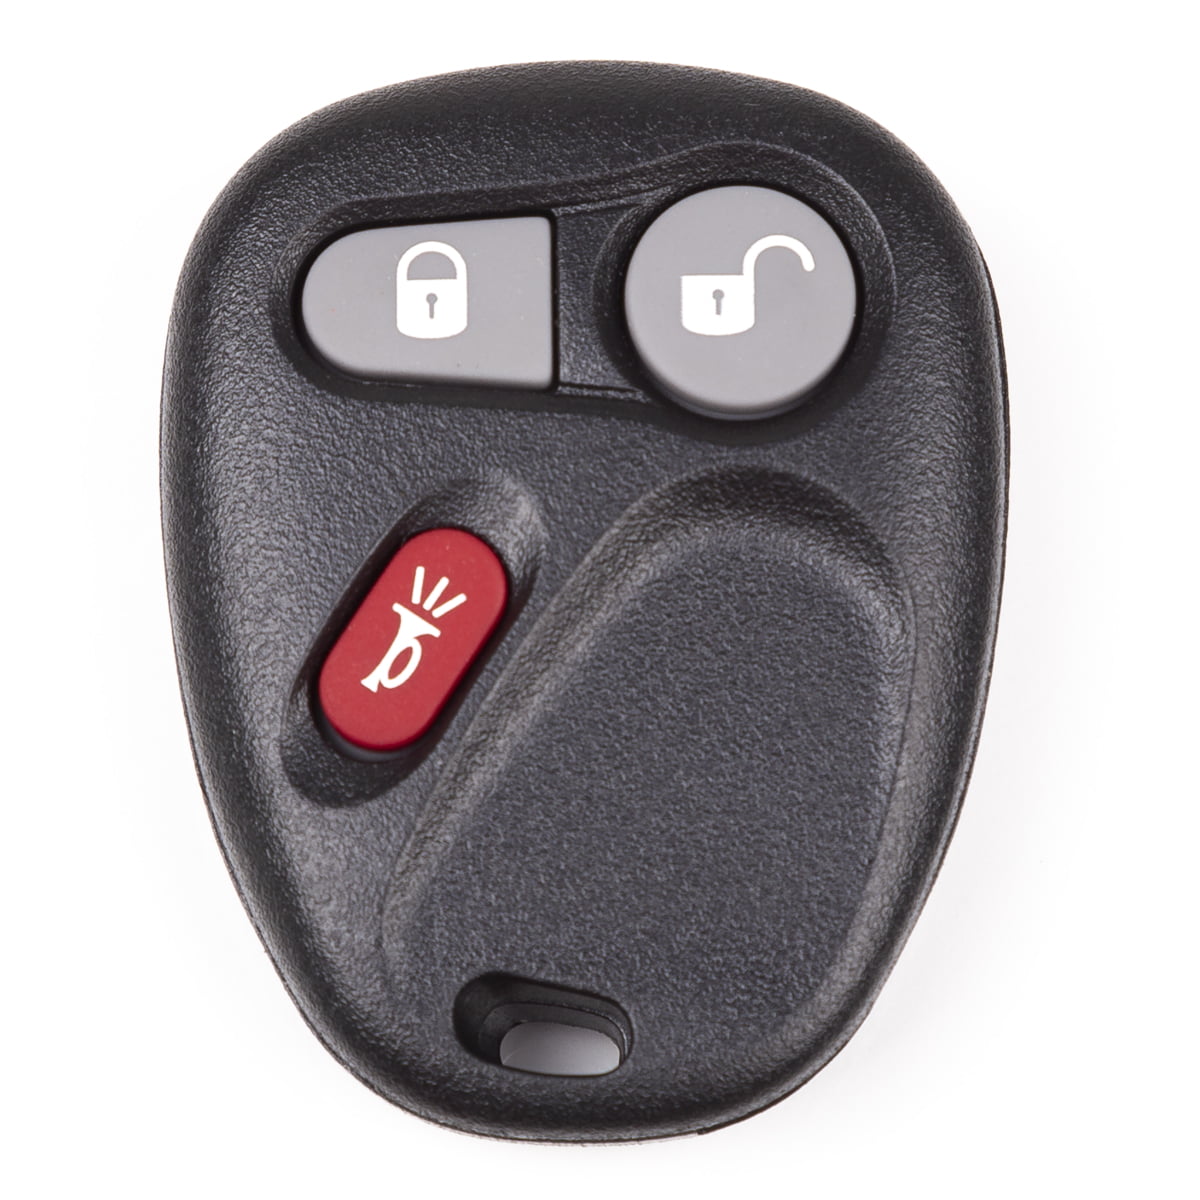 New W/ OEM Factory Electronics Remote Key Keyless Entry Fob For Fcc Id KOBUT1BT 